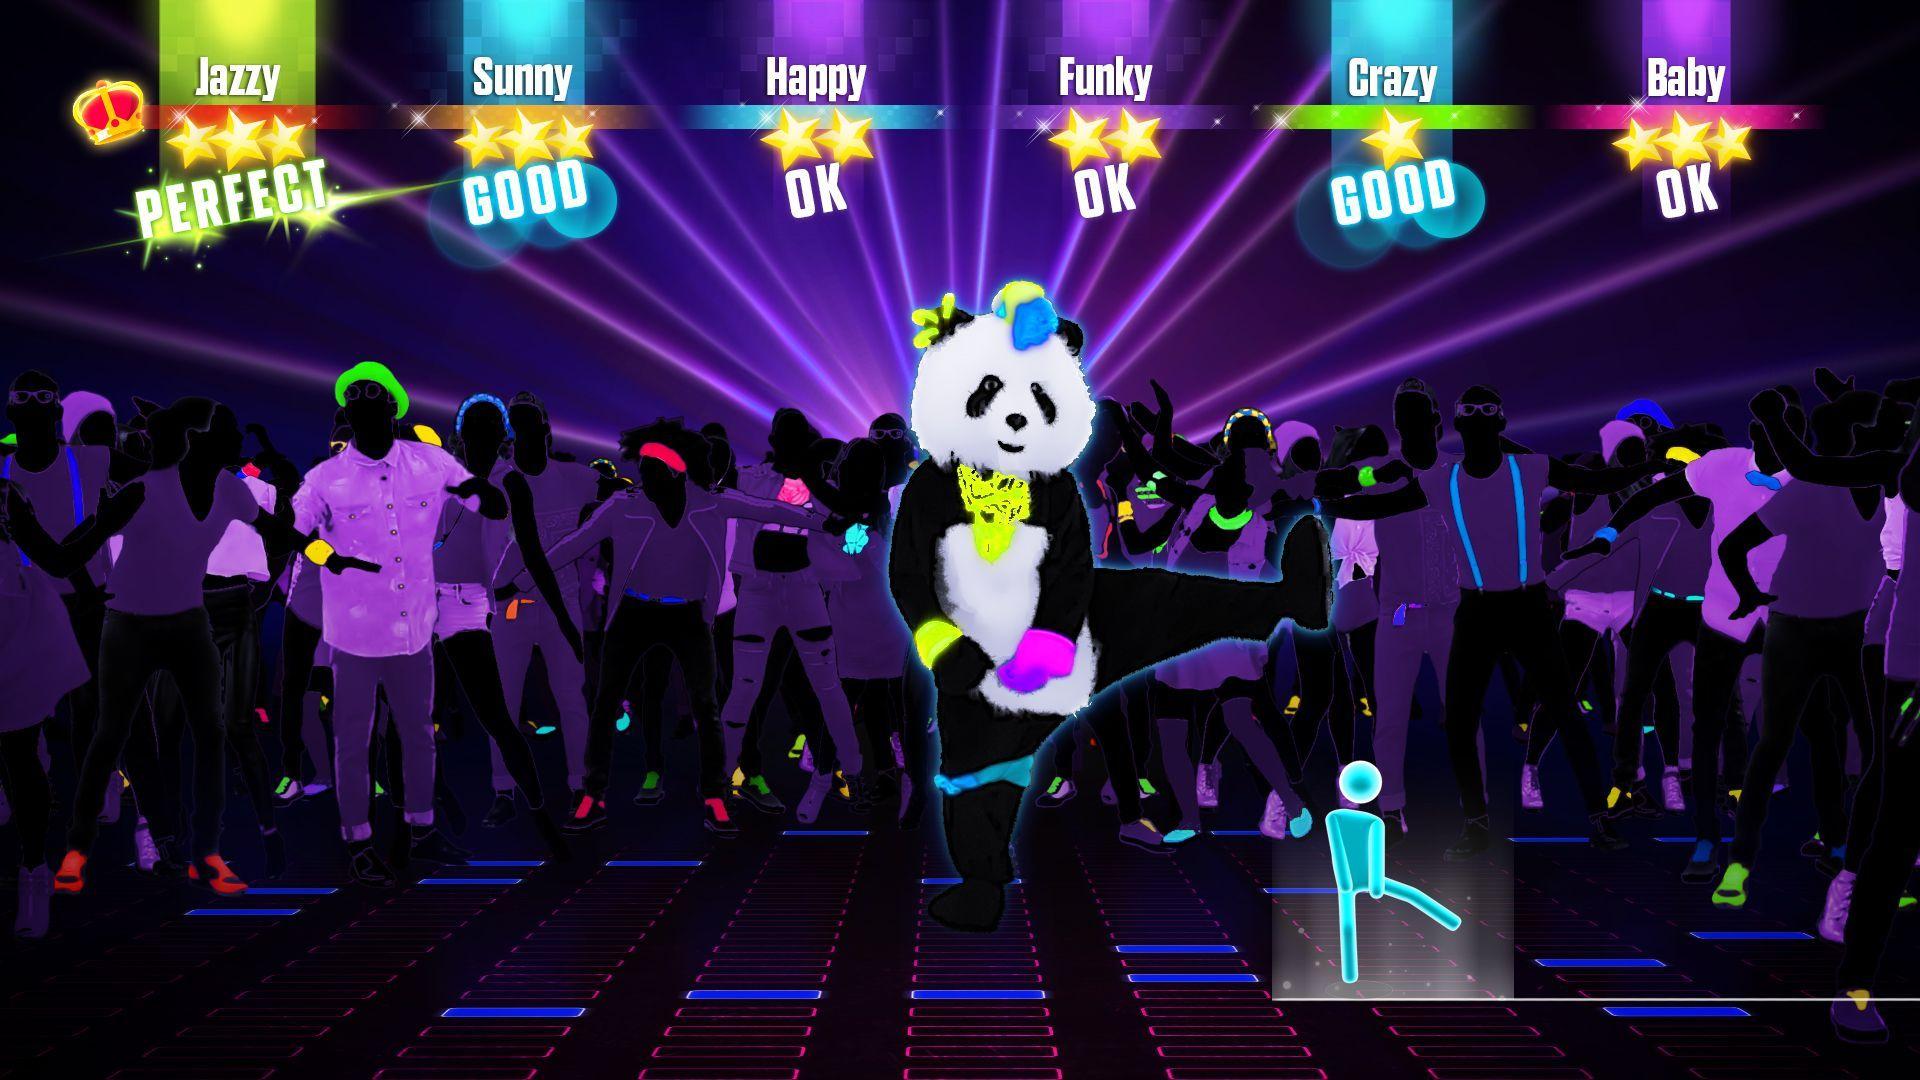 Just Dance 2016 Impressions: You Can Dance If You Want To